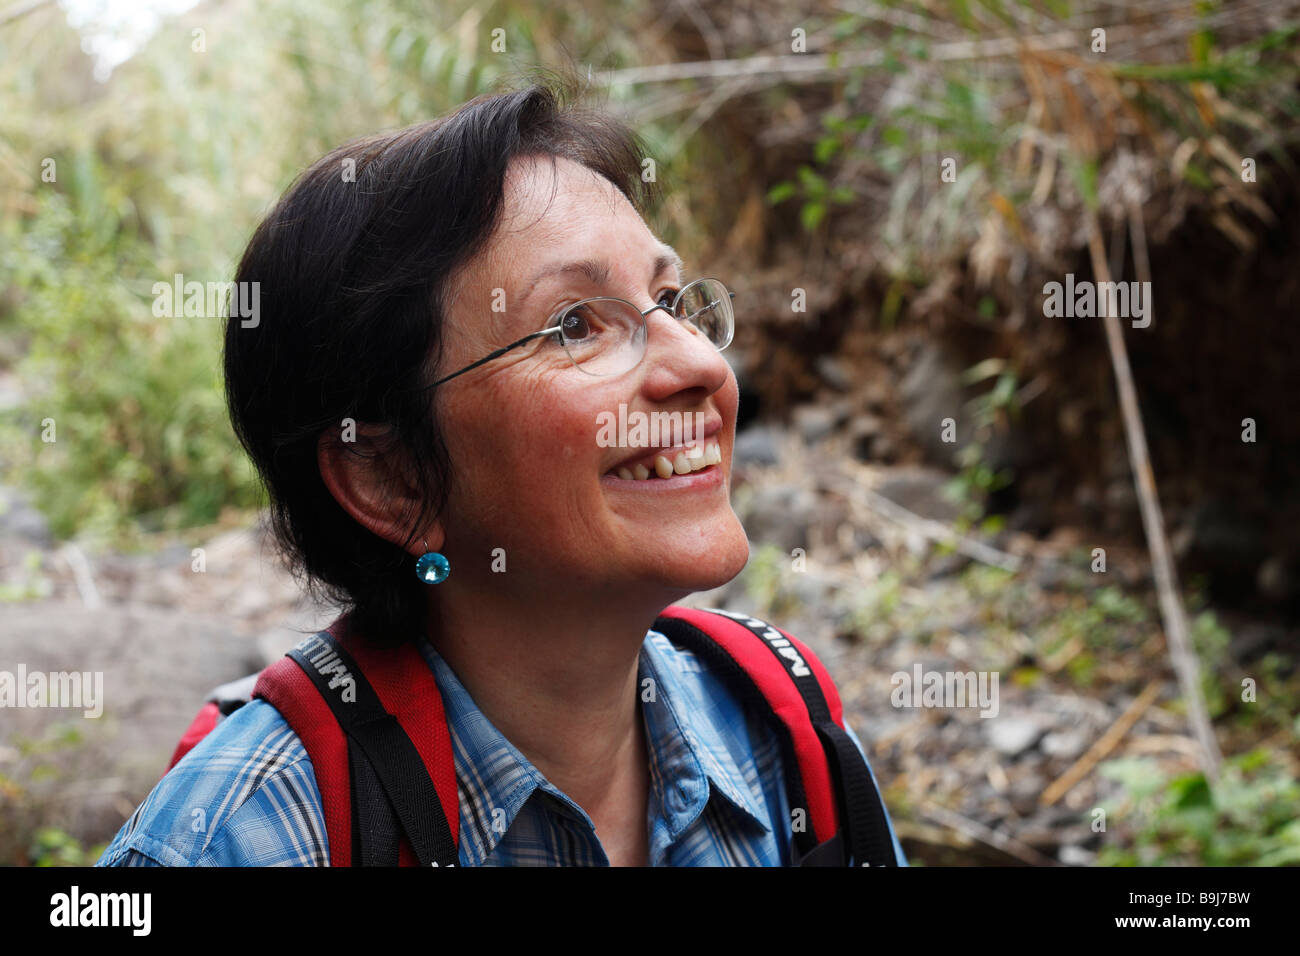 Woman smiling whilst on a hike, La Gomera, Canaries, Canary Islands, Spain, Europe Stock Photo